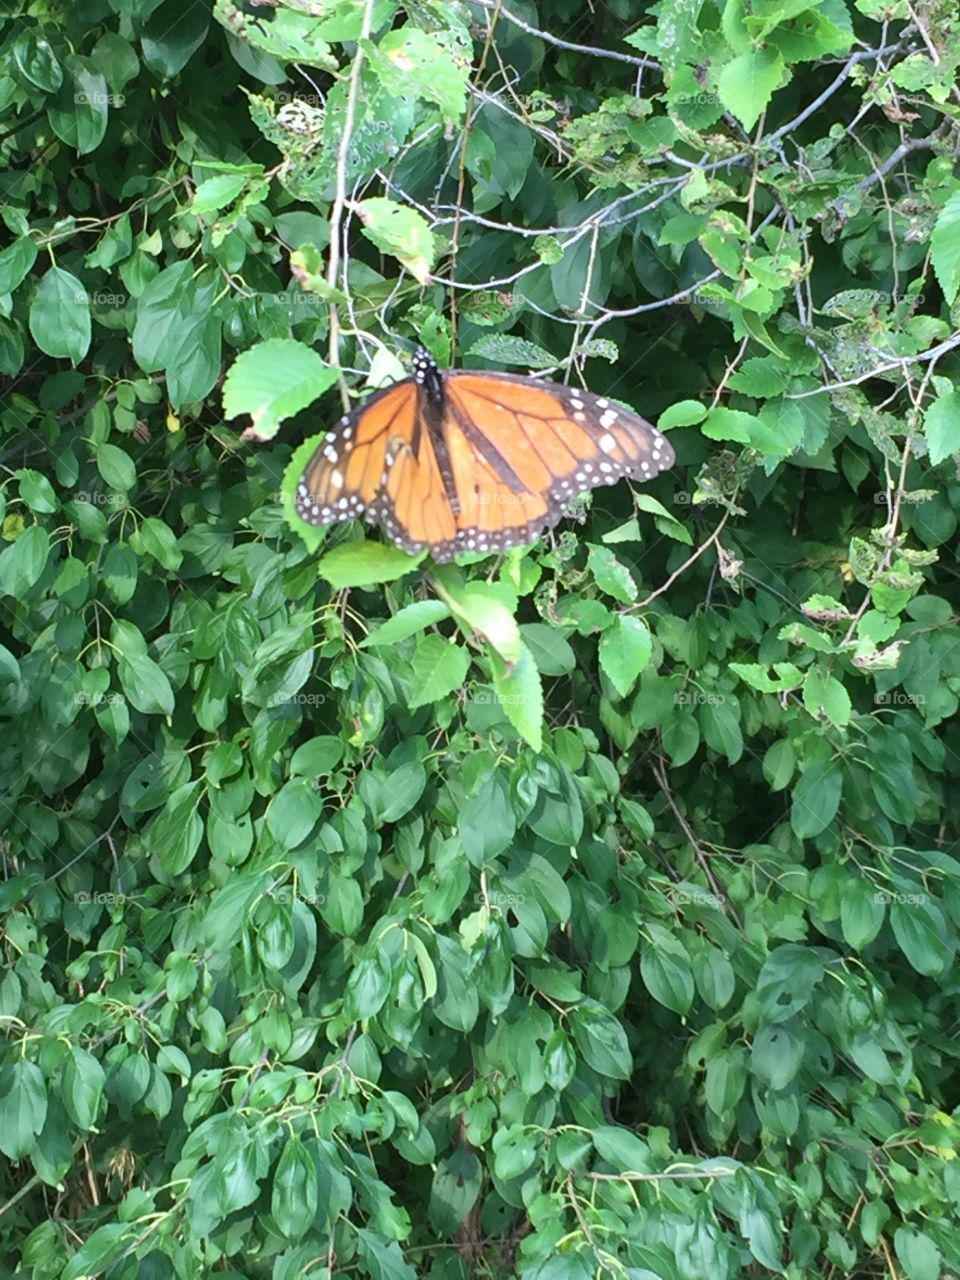 An orange butterfly resting on some leaves, at peace.